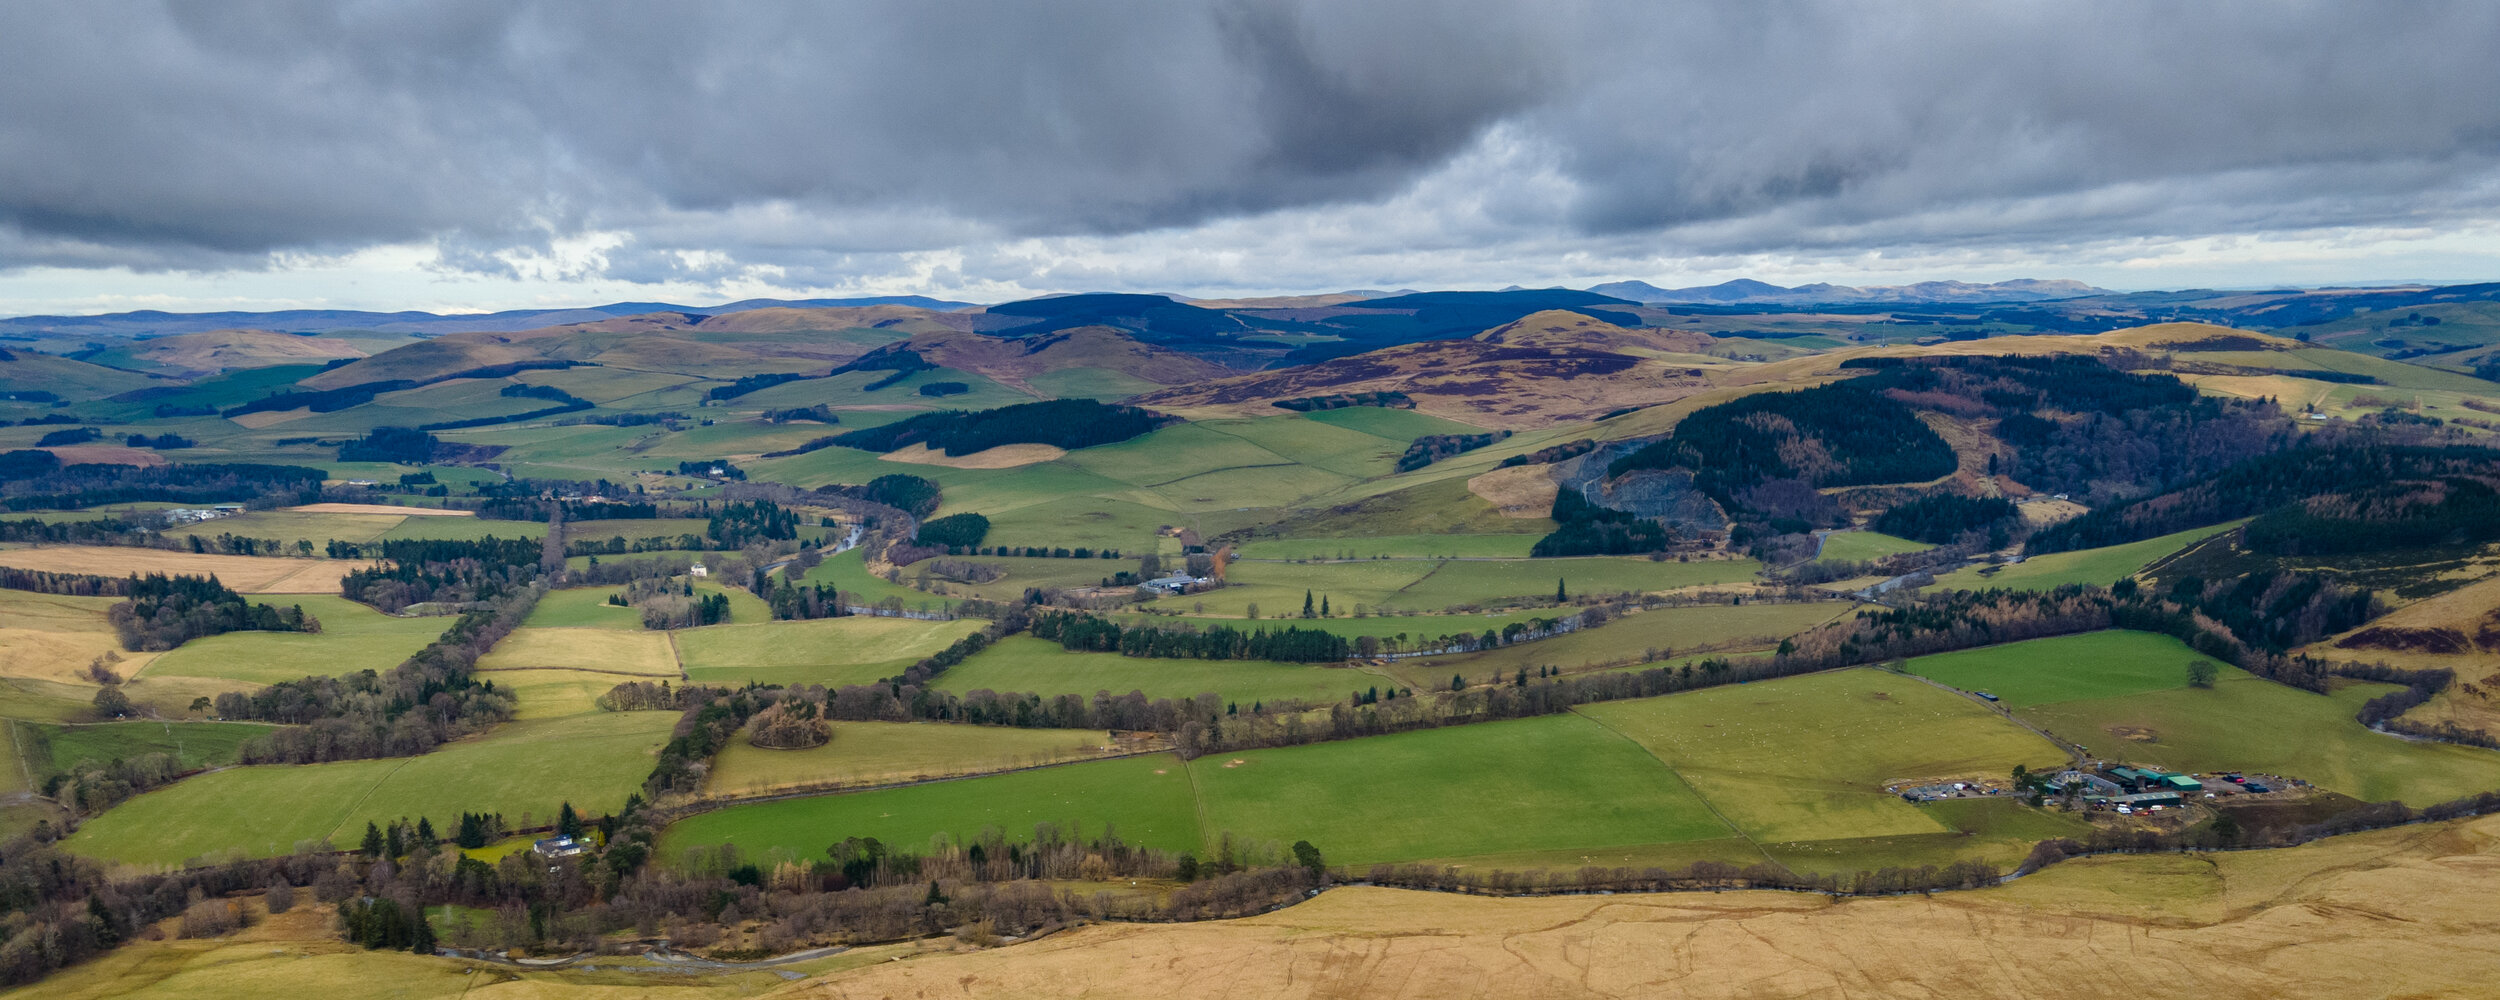 Tweed Valley from Cademuir Hill